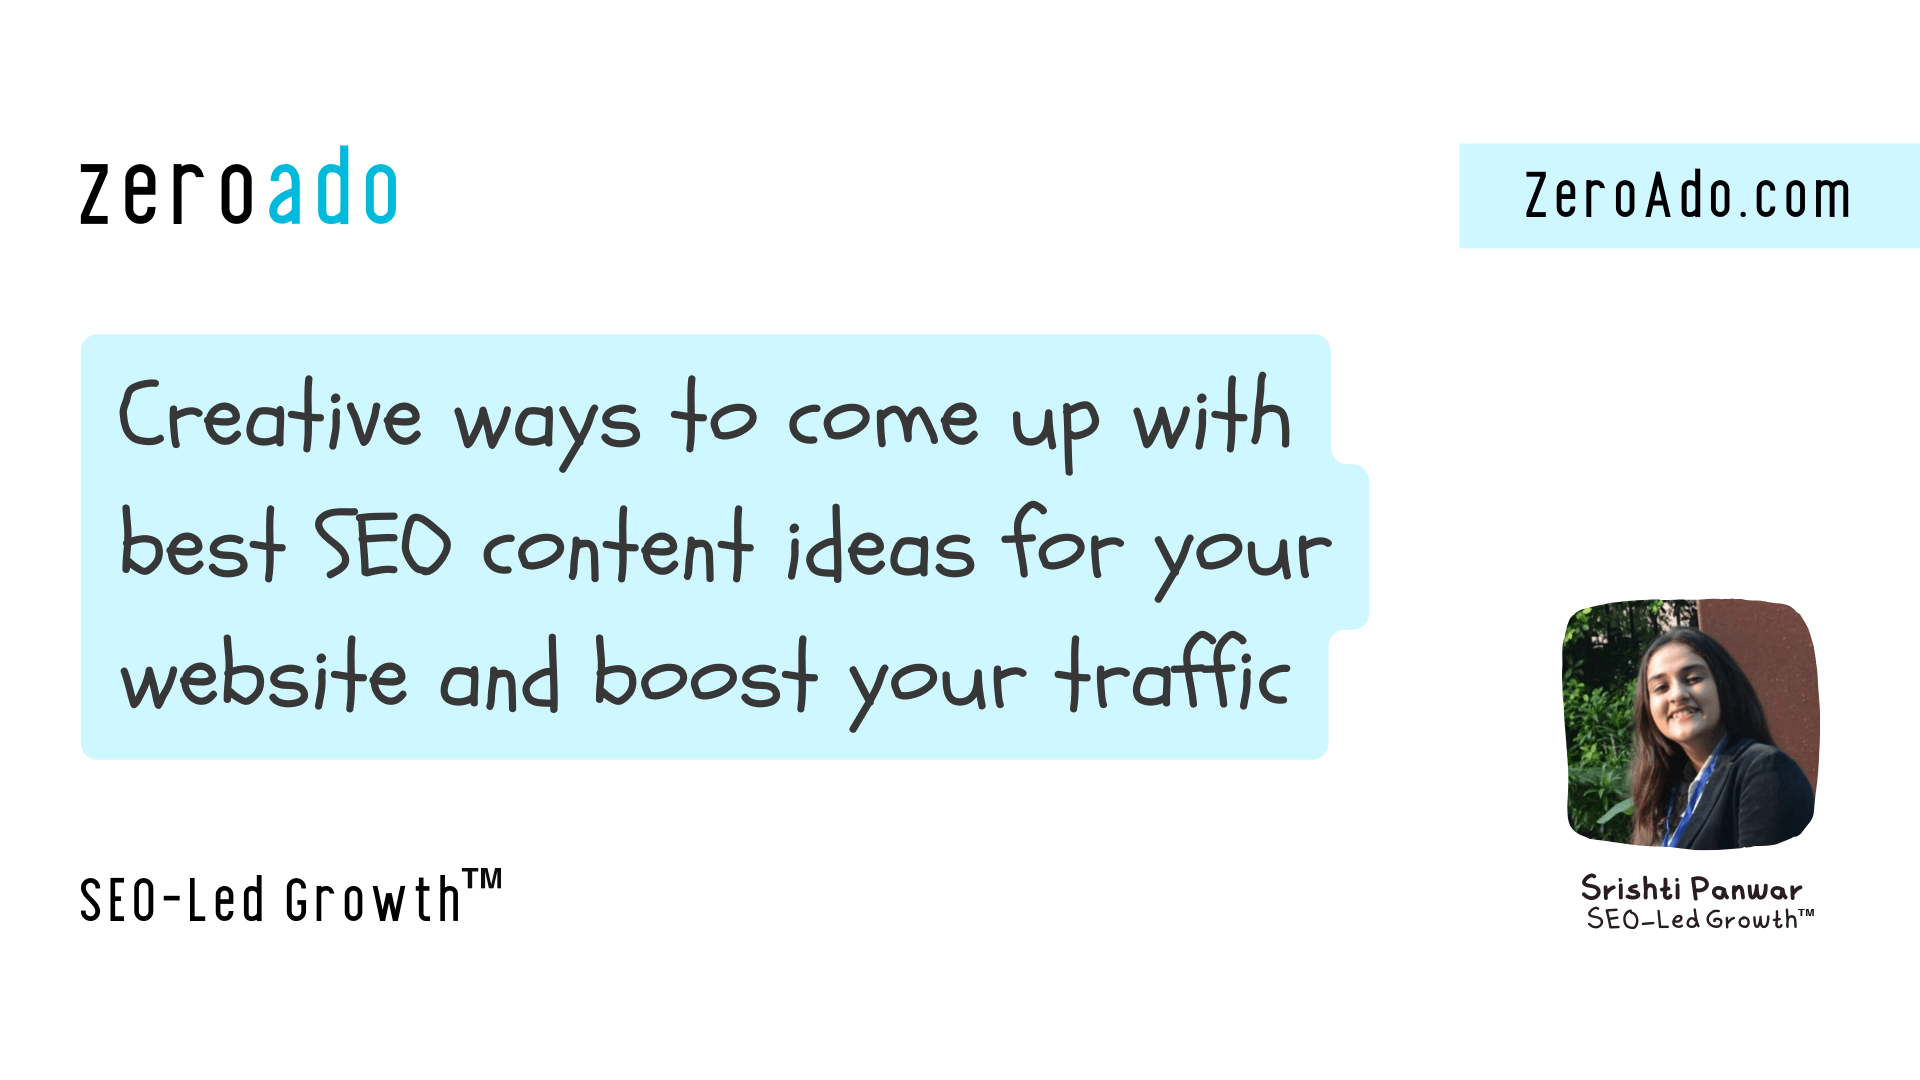 Ways to get unique SEO content ideas to increase website traffic.